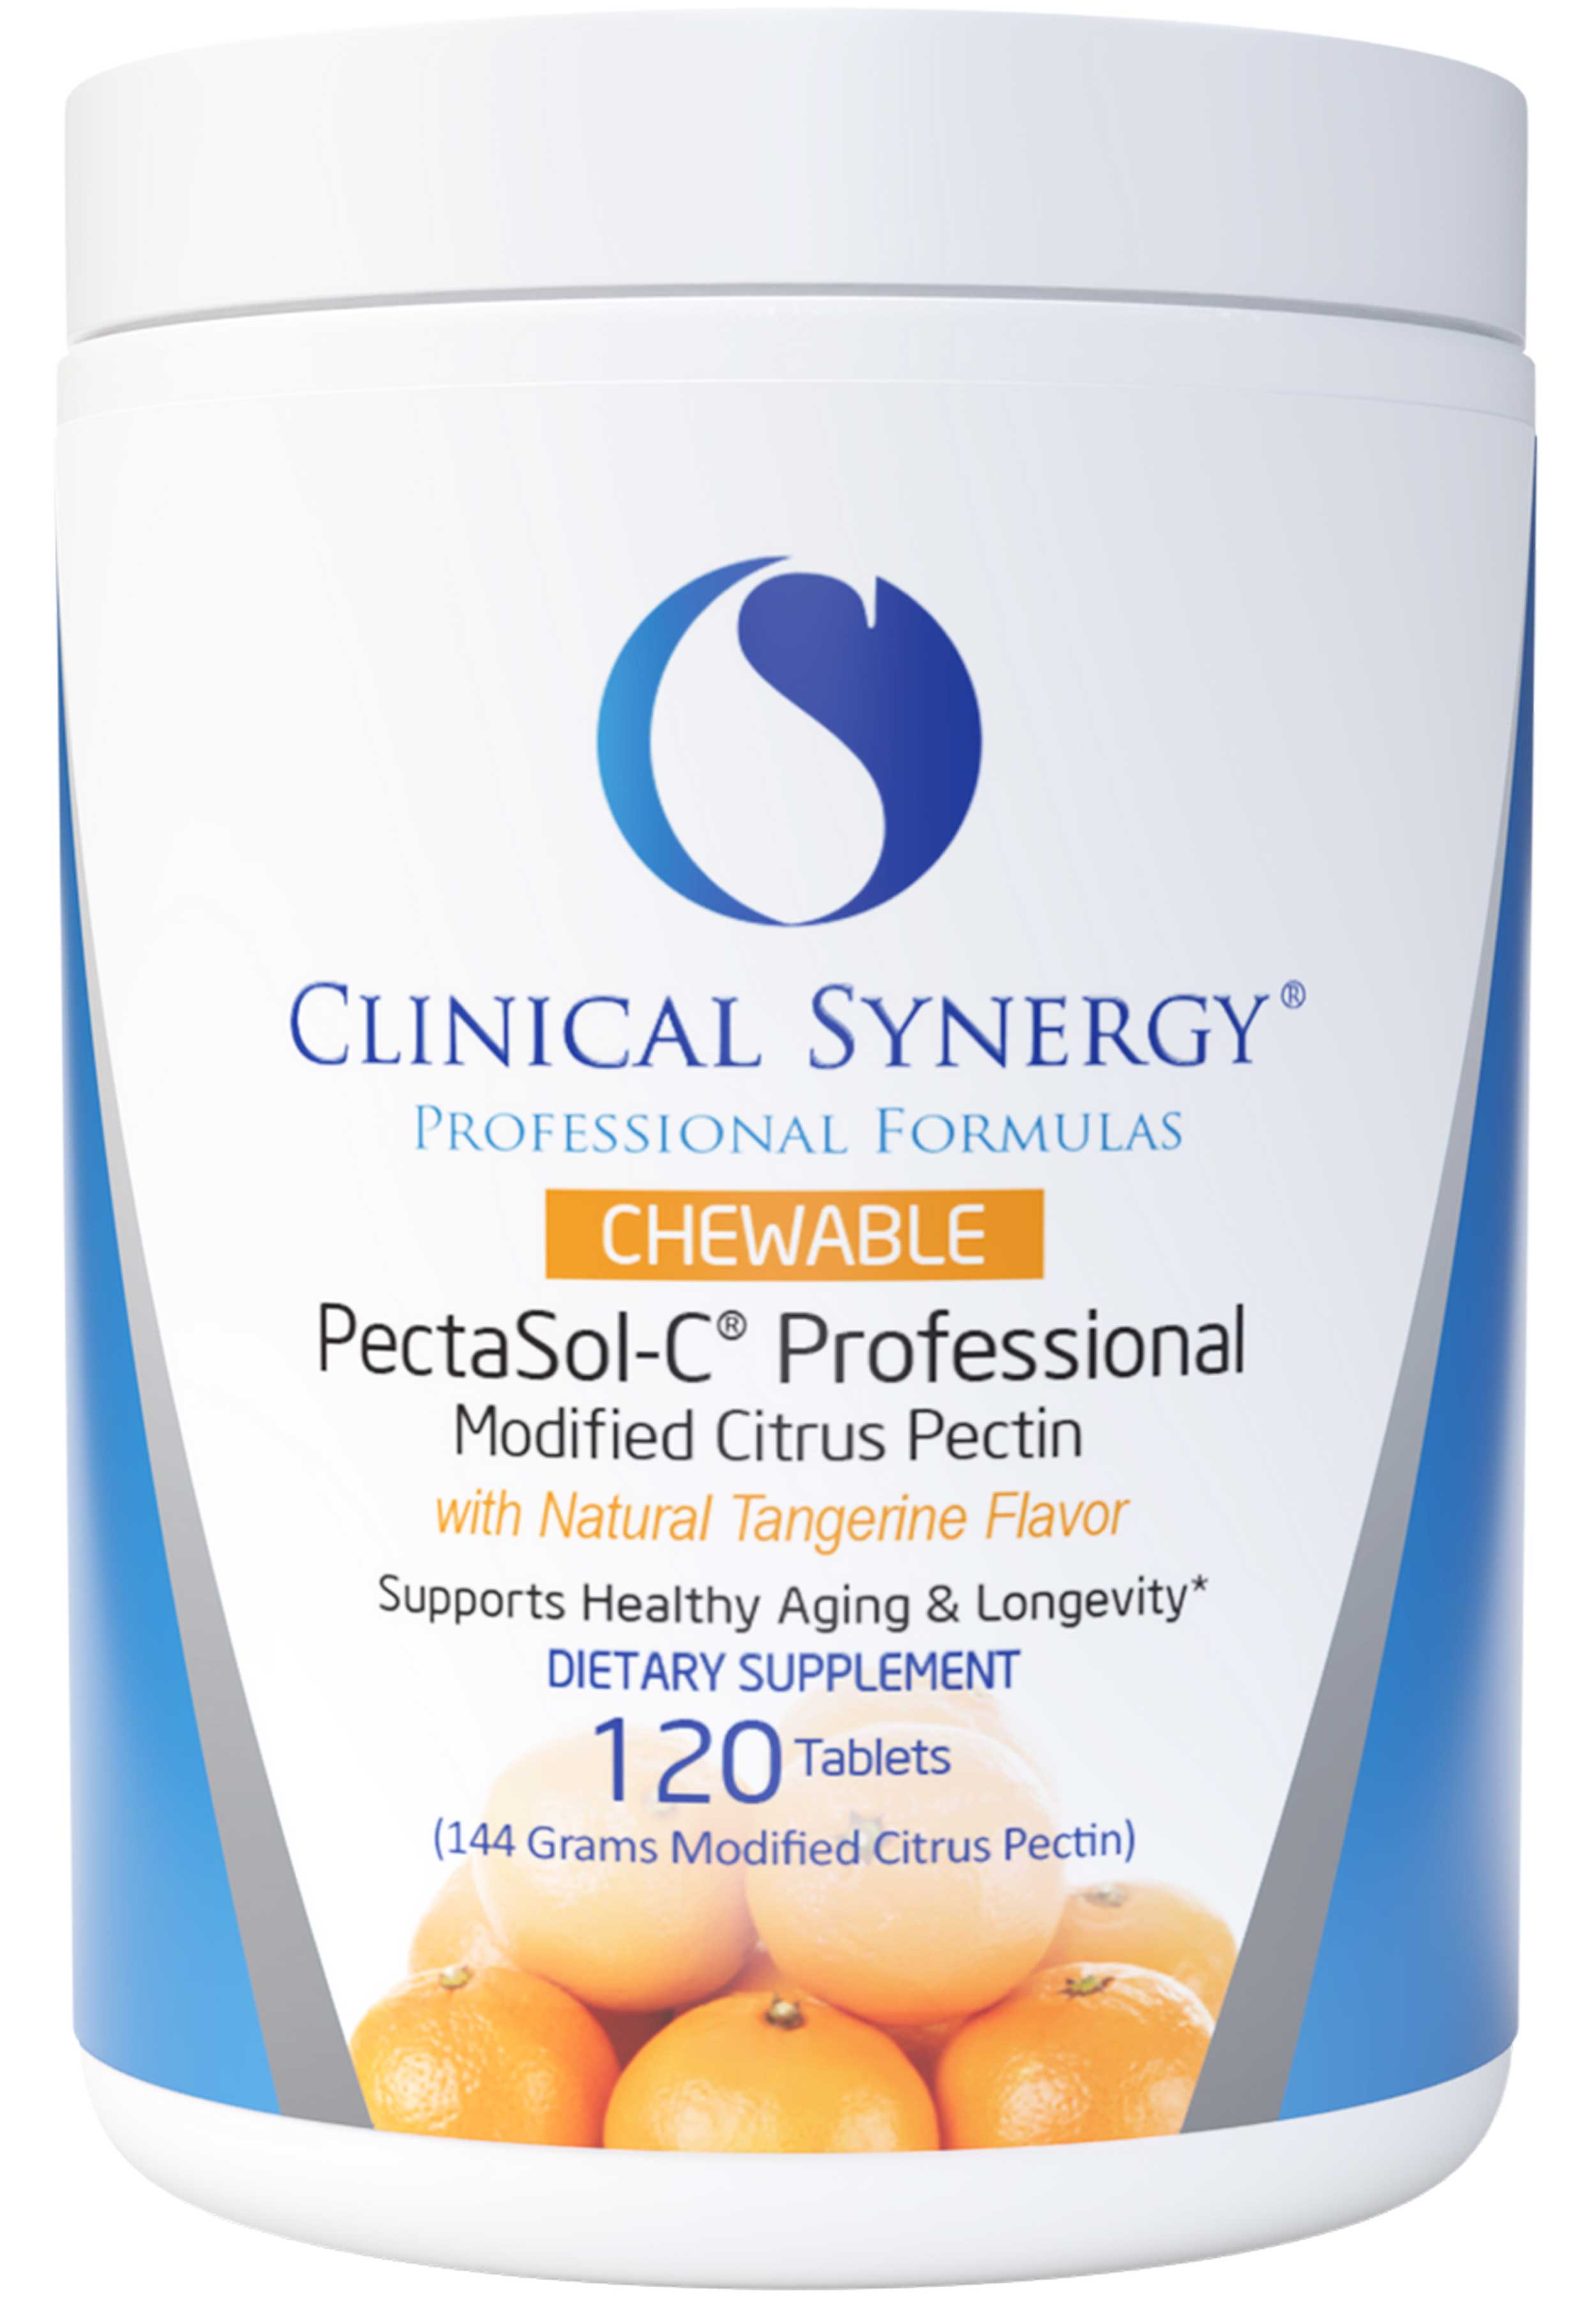 Clinical Synergy Professional Formulas PectaSol-C Professional Tangerine Chewable